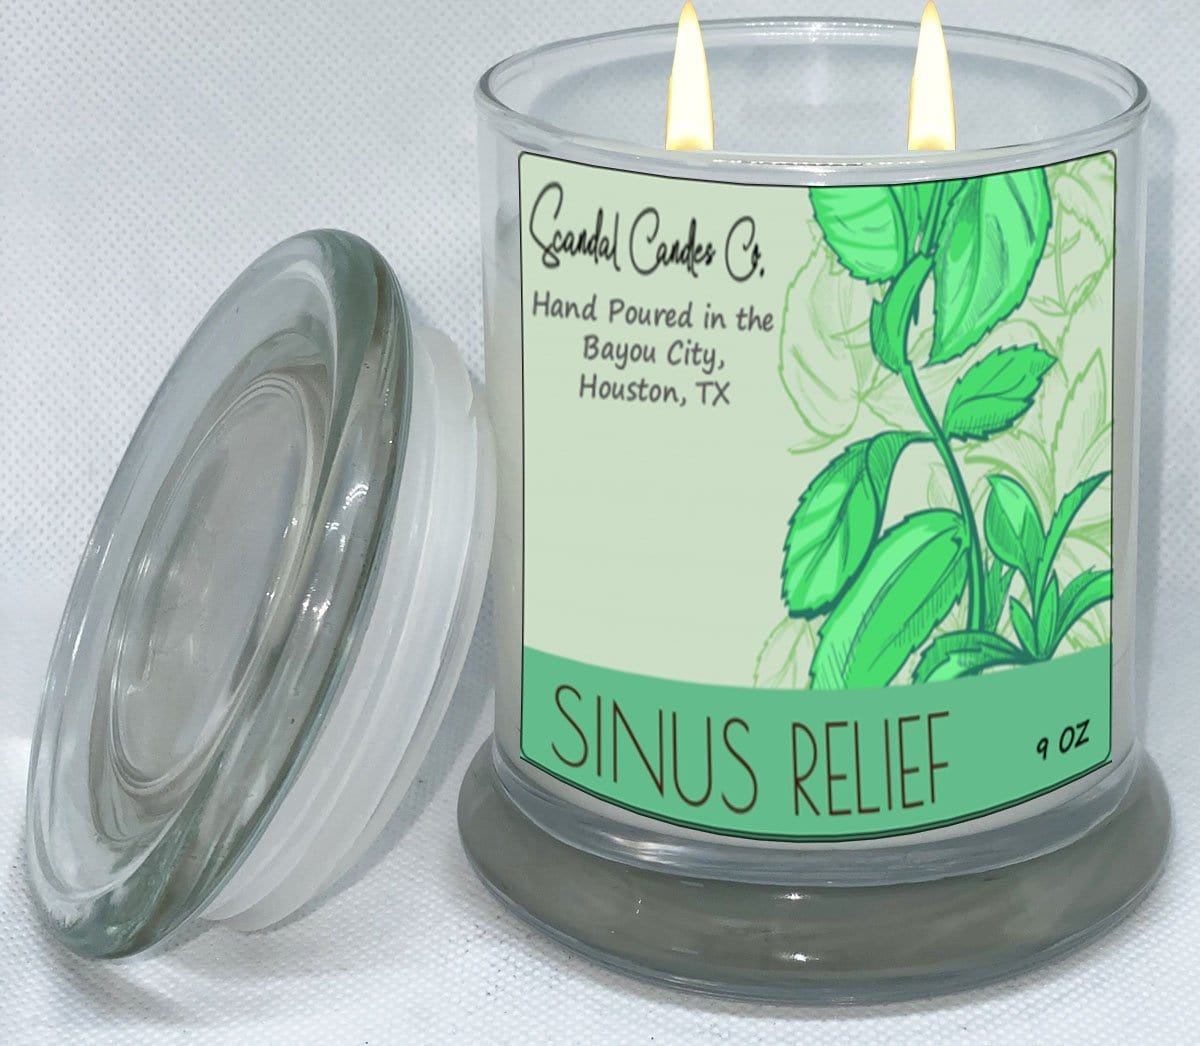 Sinus Relief - Scandal Candles Co.